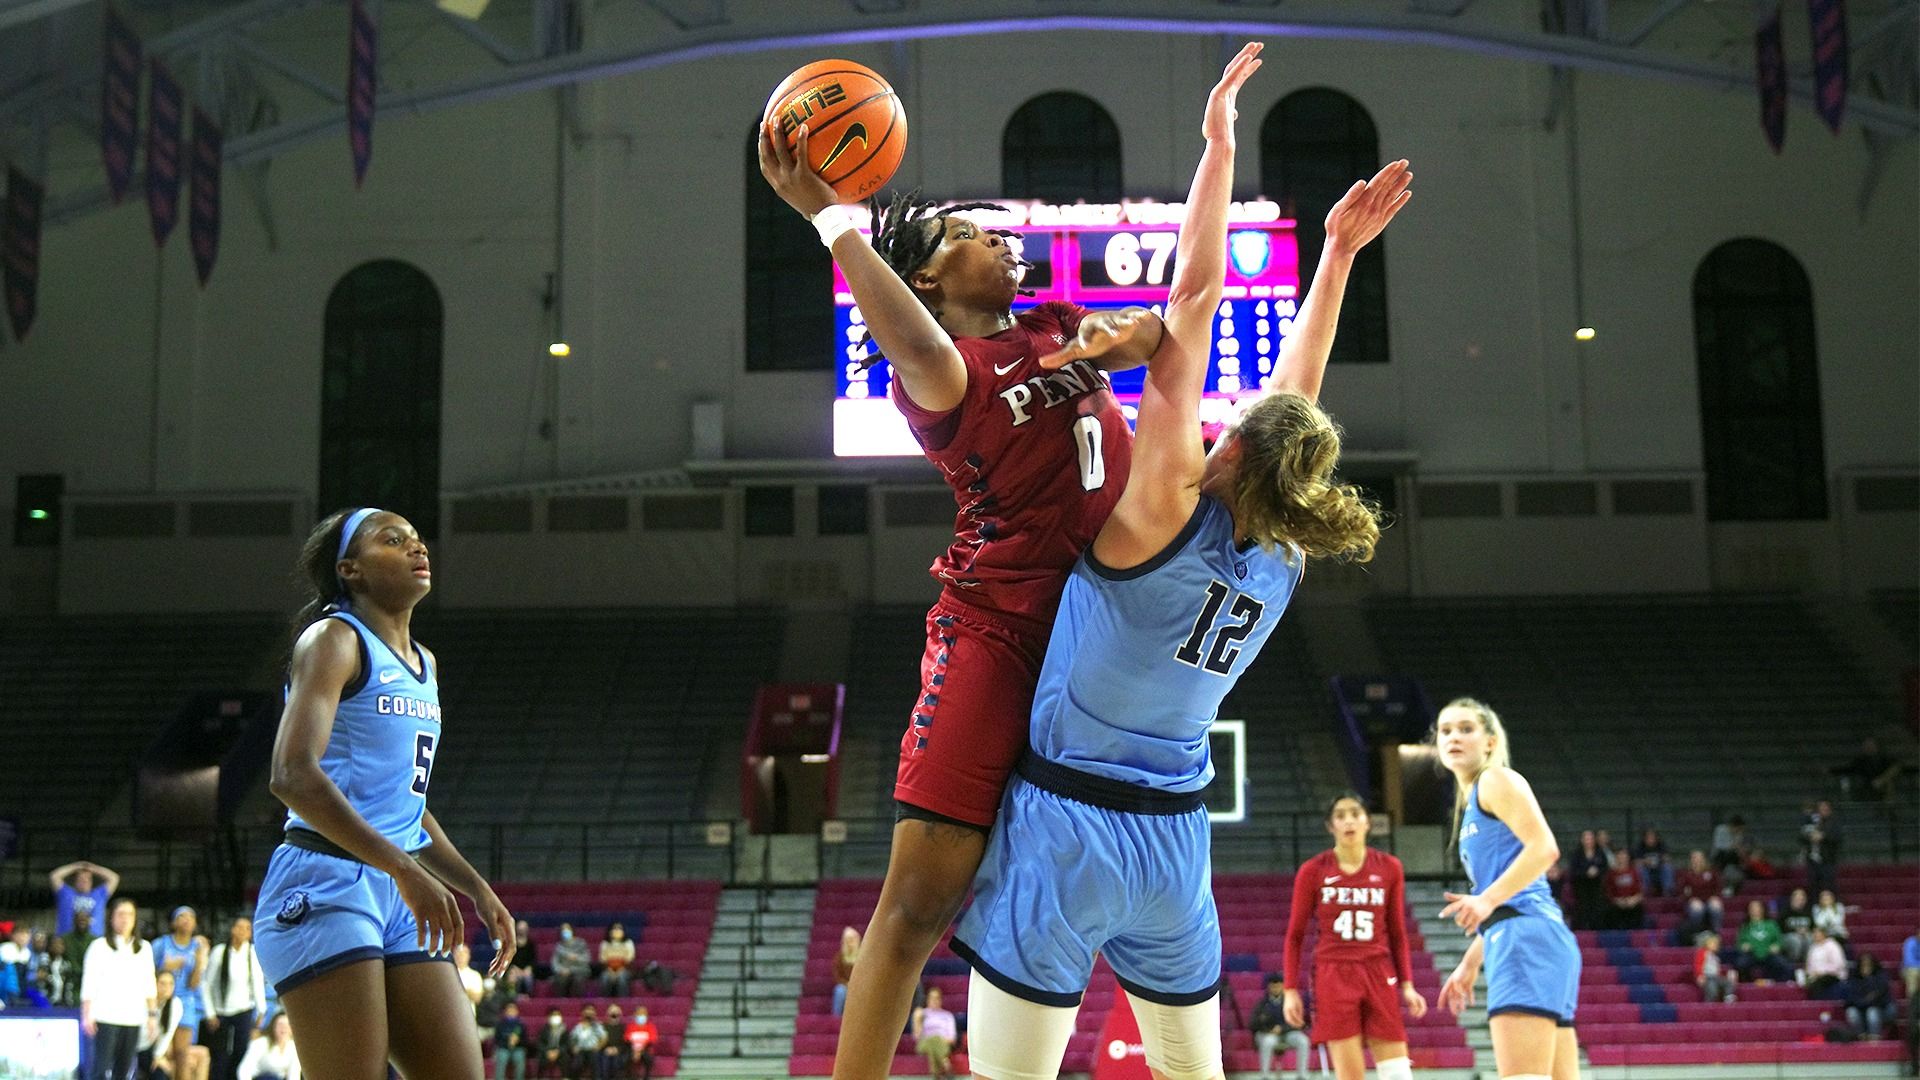 Holding the ball in the air over her head, Obi takes a shot while a Columbia defender guards with both arms up at the Palestra.